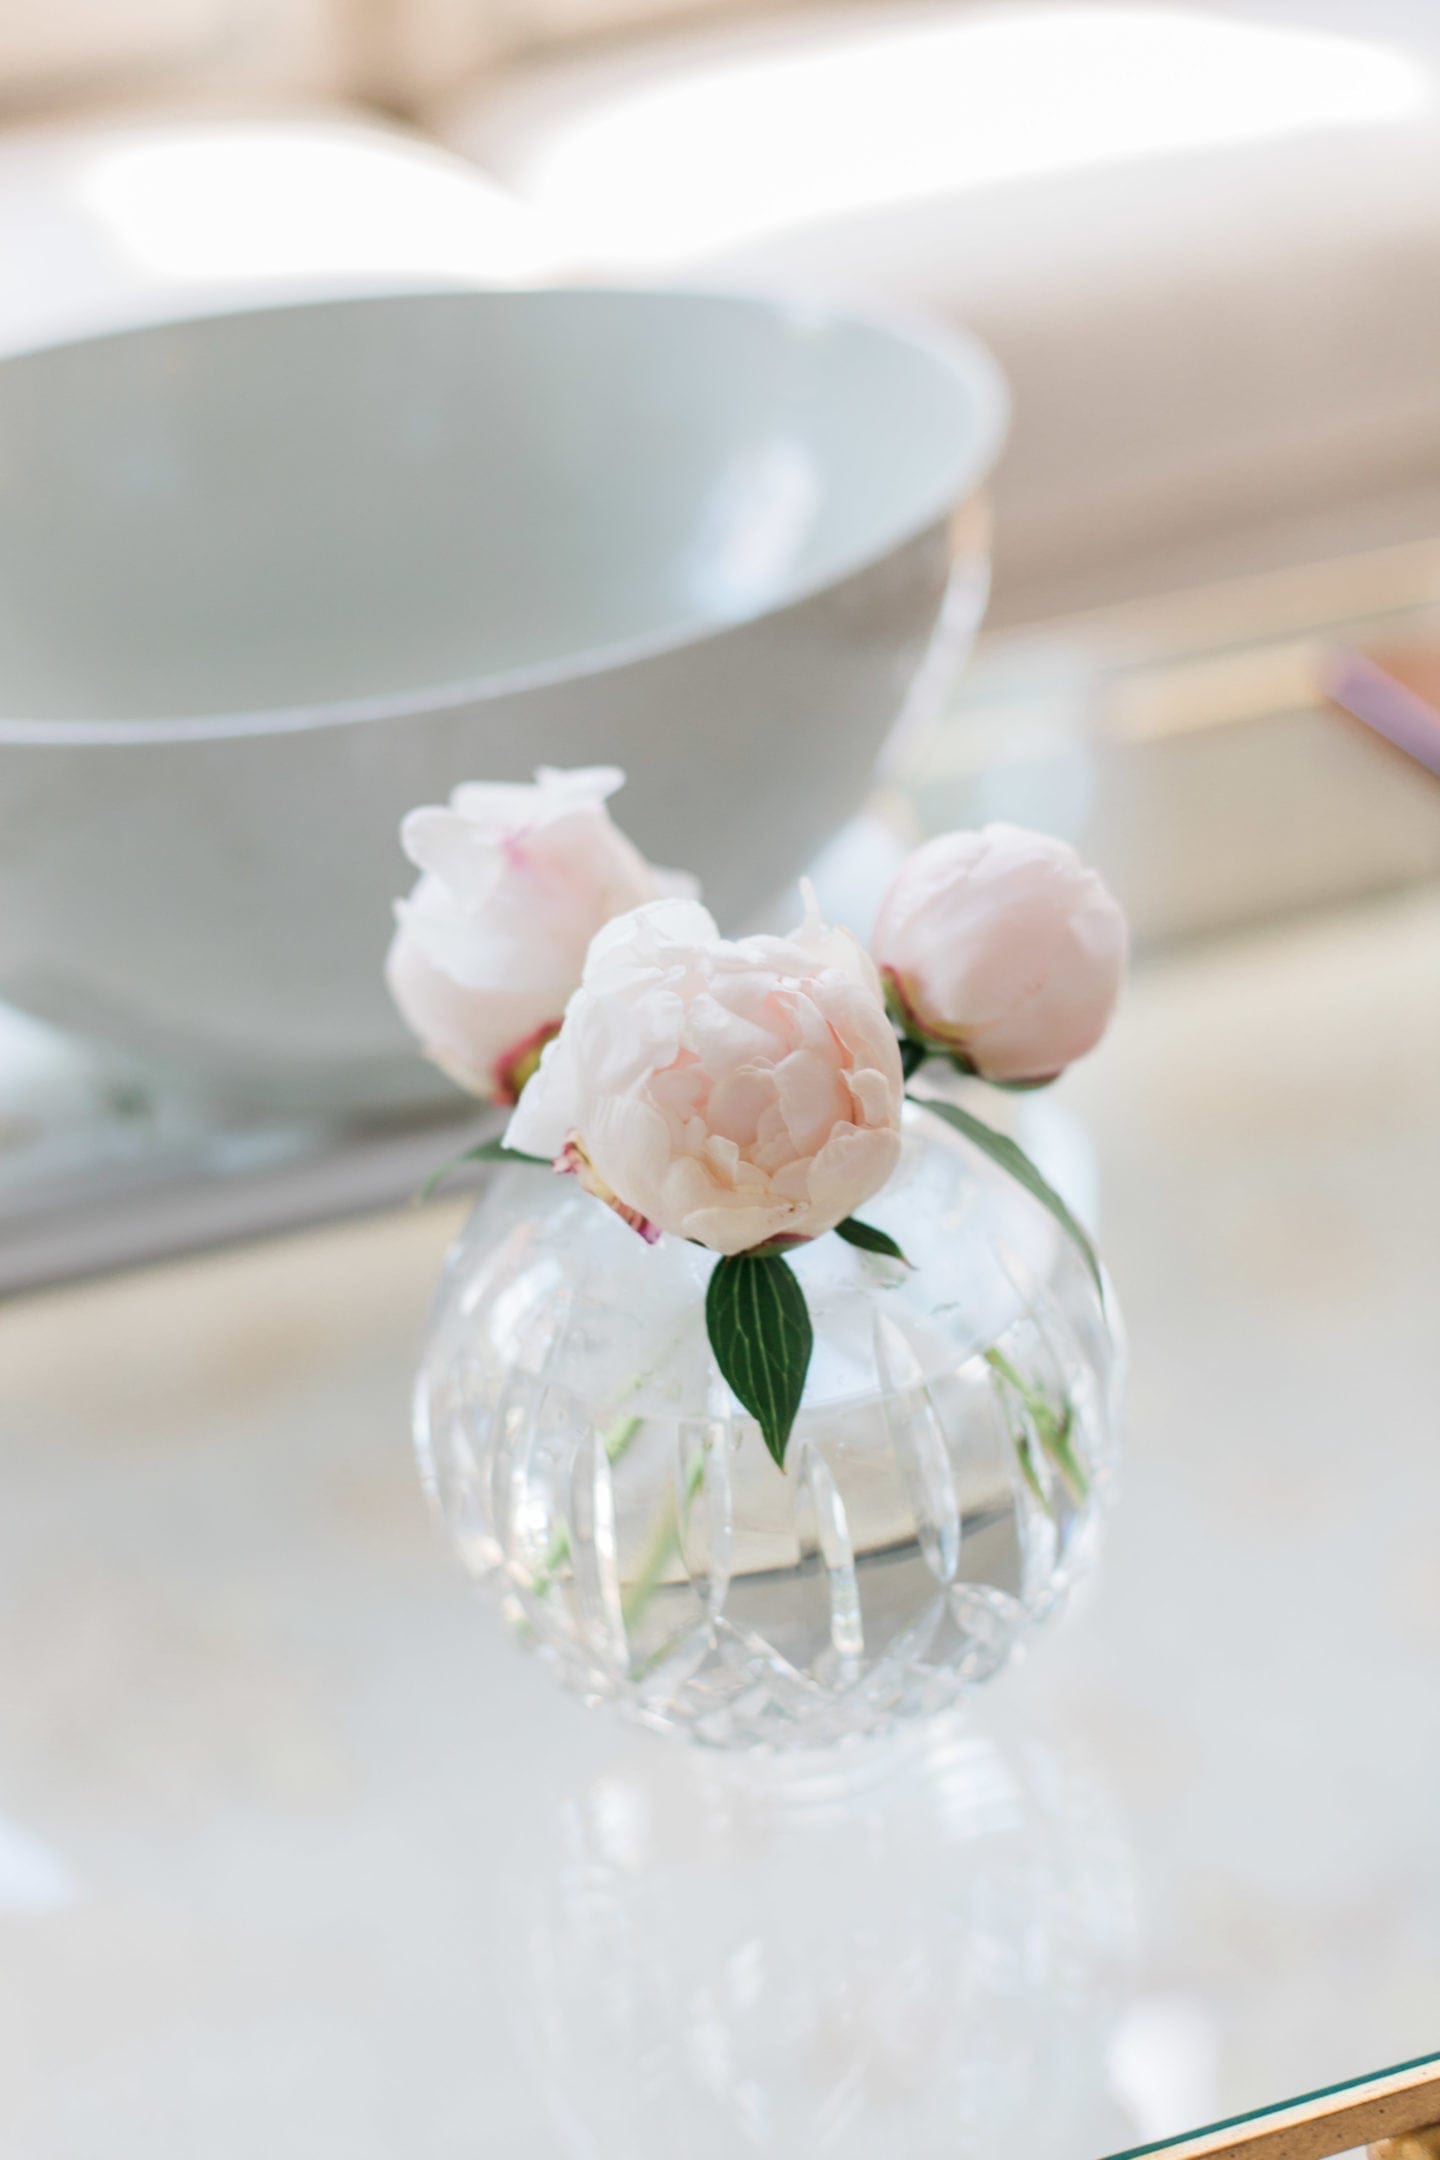 Information on when to cut peonies for arrangements. Learn what not to do with peony bushes and know when to cut peony blooms.